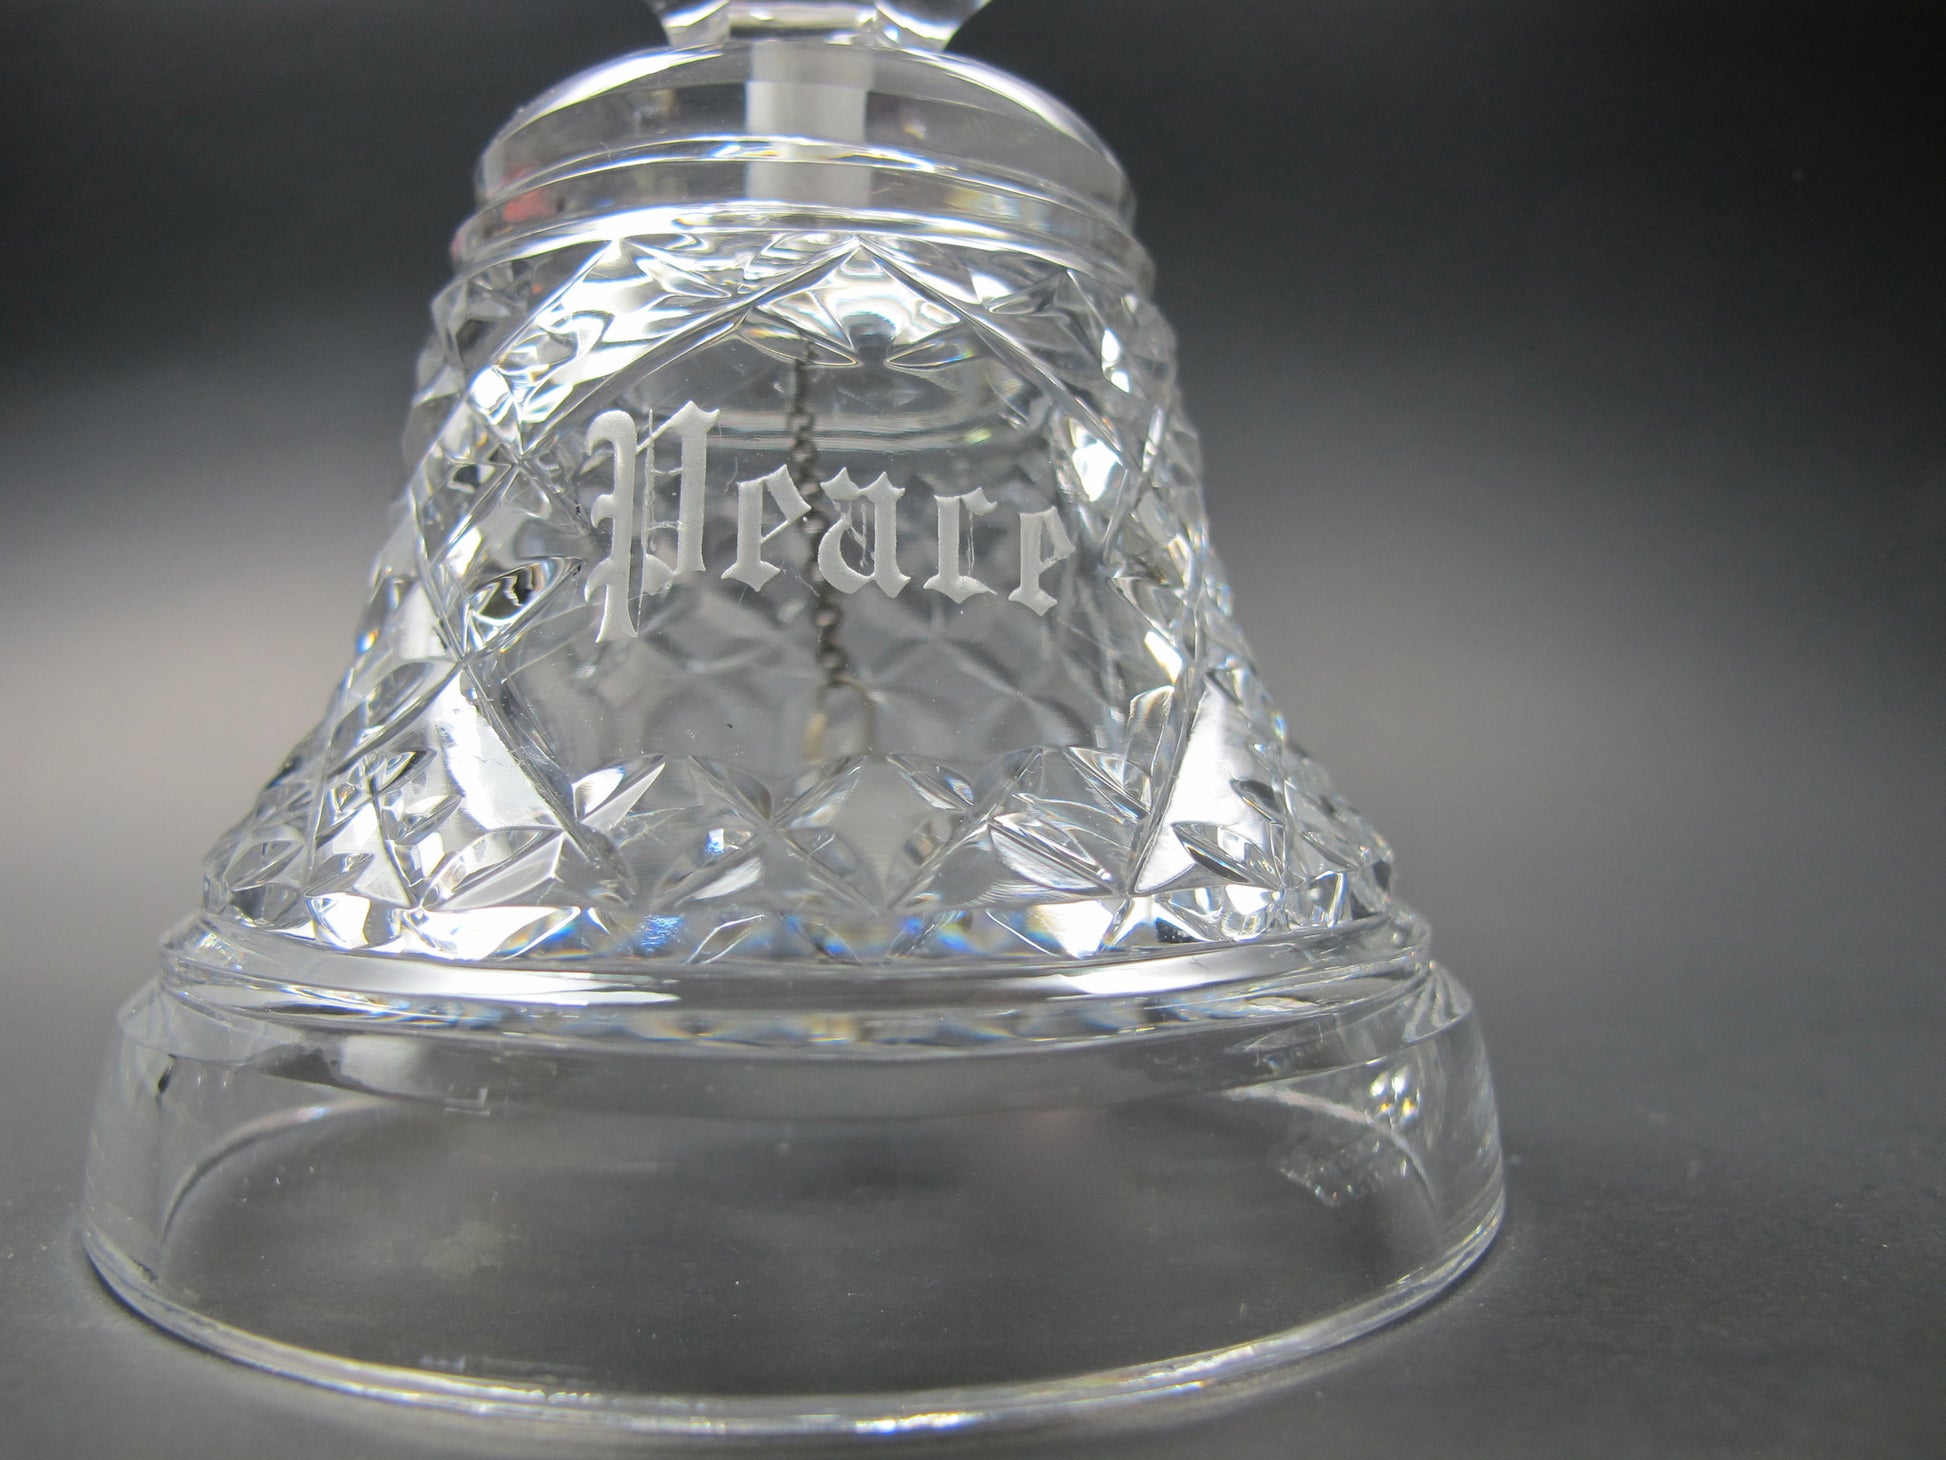 Signed Waterford Hand Cut glass PEACE BELL - O'Rourke crystal awards & gifts abp cut glass